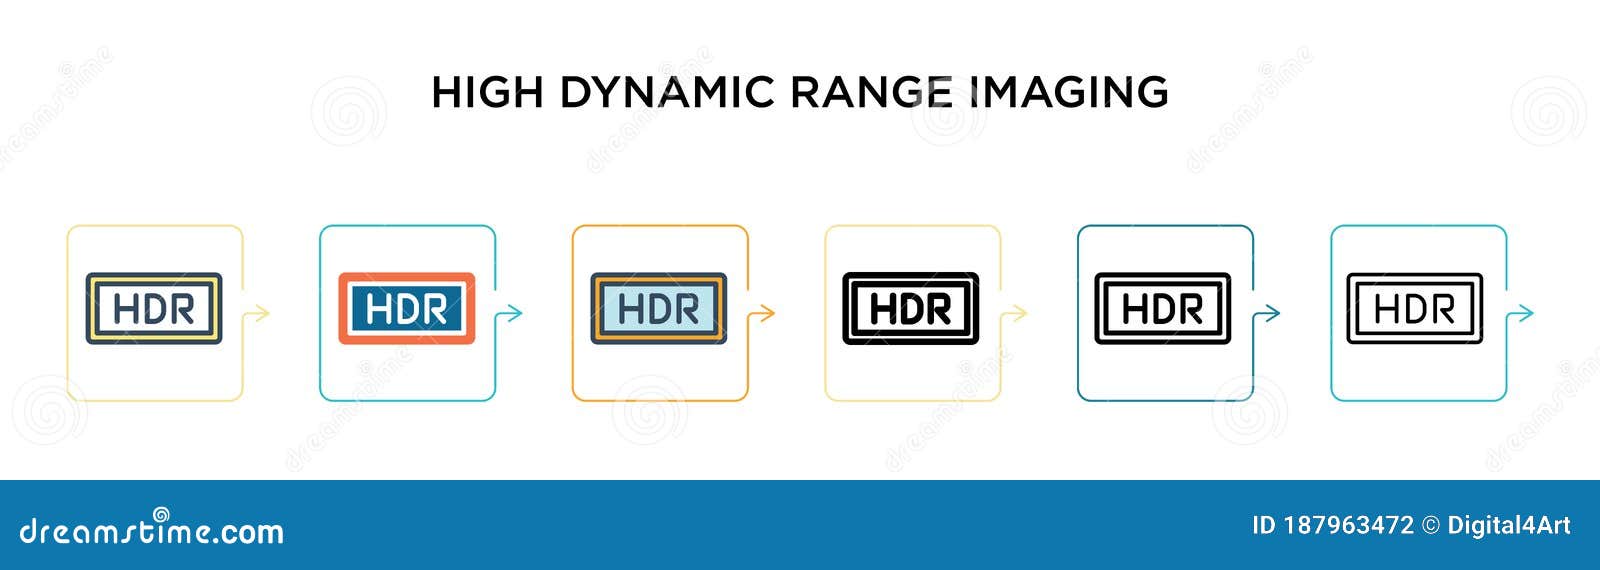 high dynamic range imaging  icon in 6 different modern styles. black, two colored high dynamic range imaging icons ed